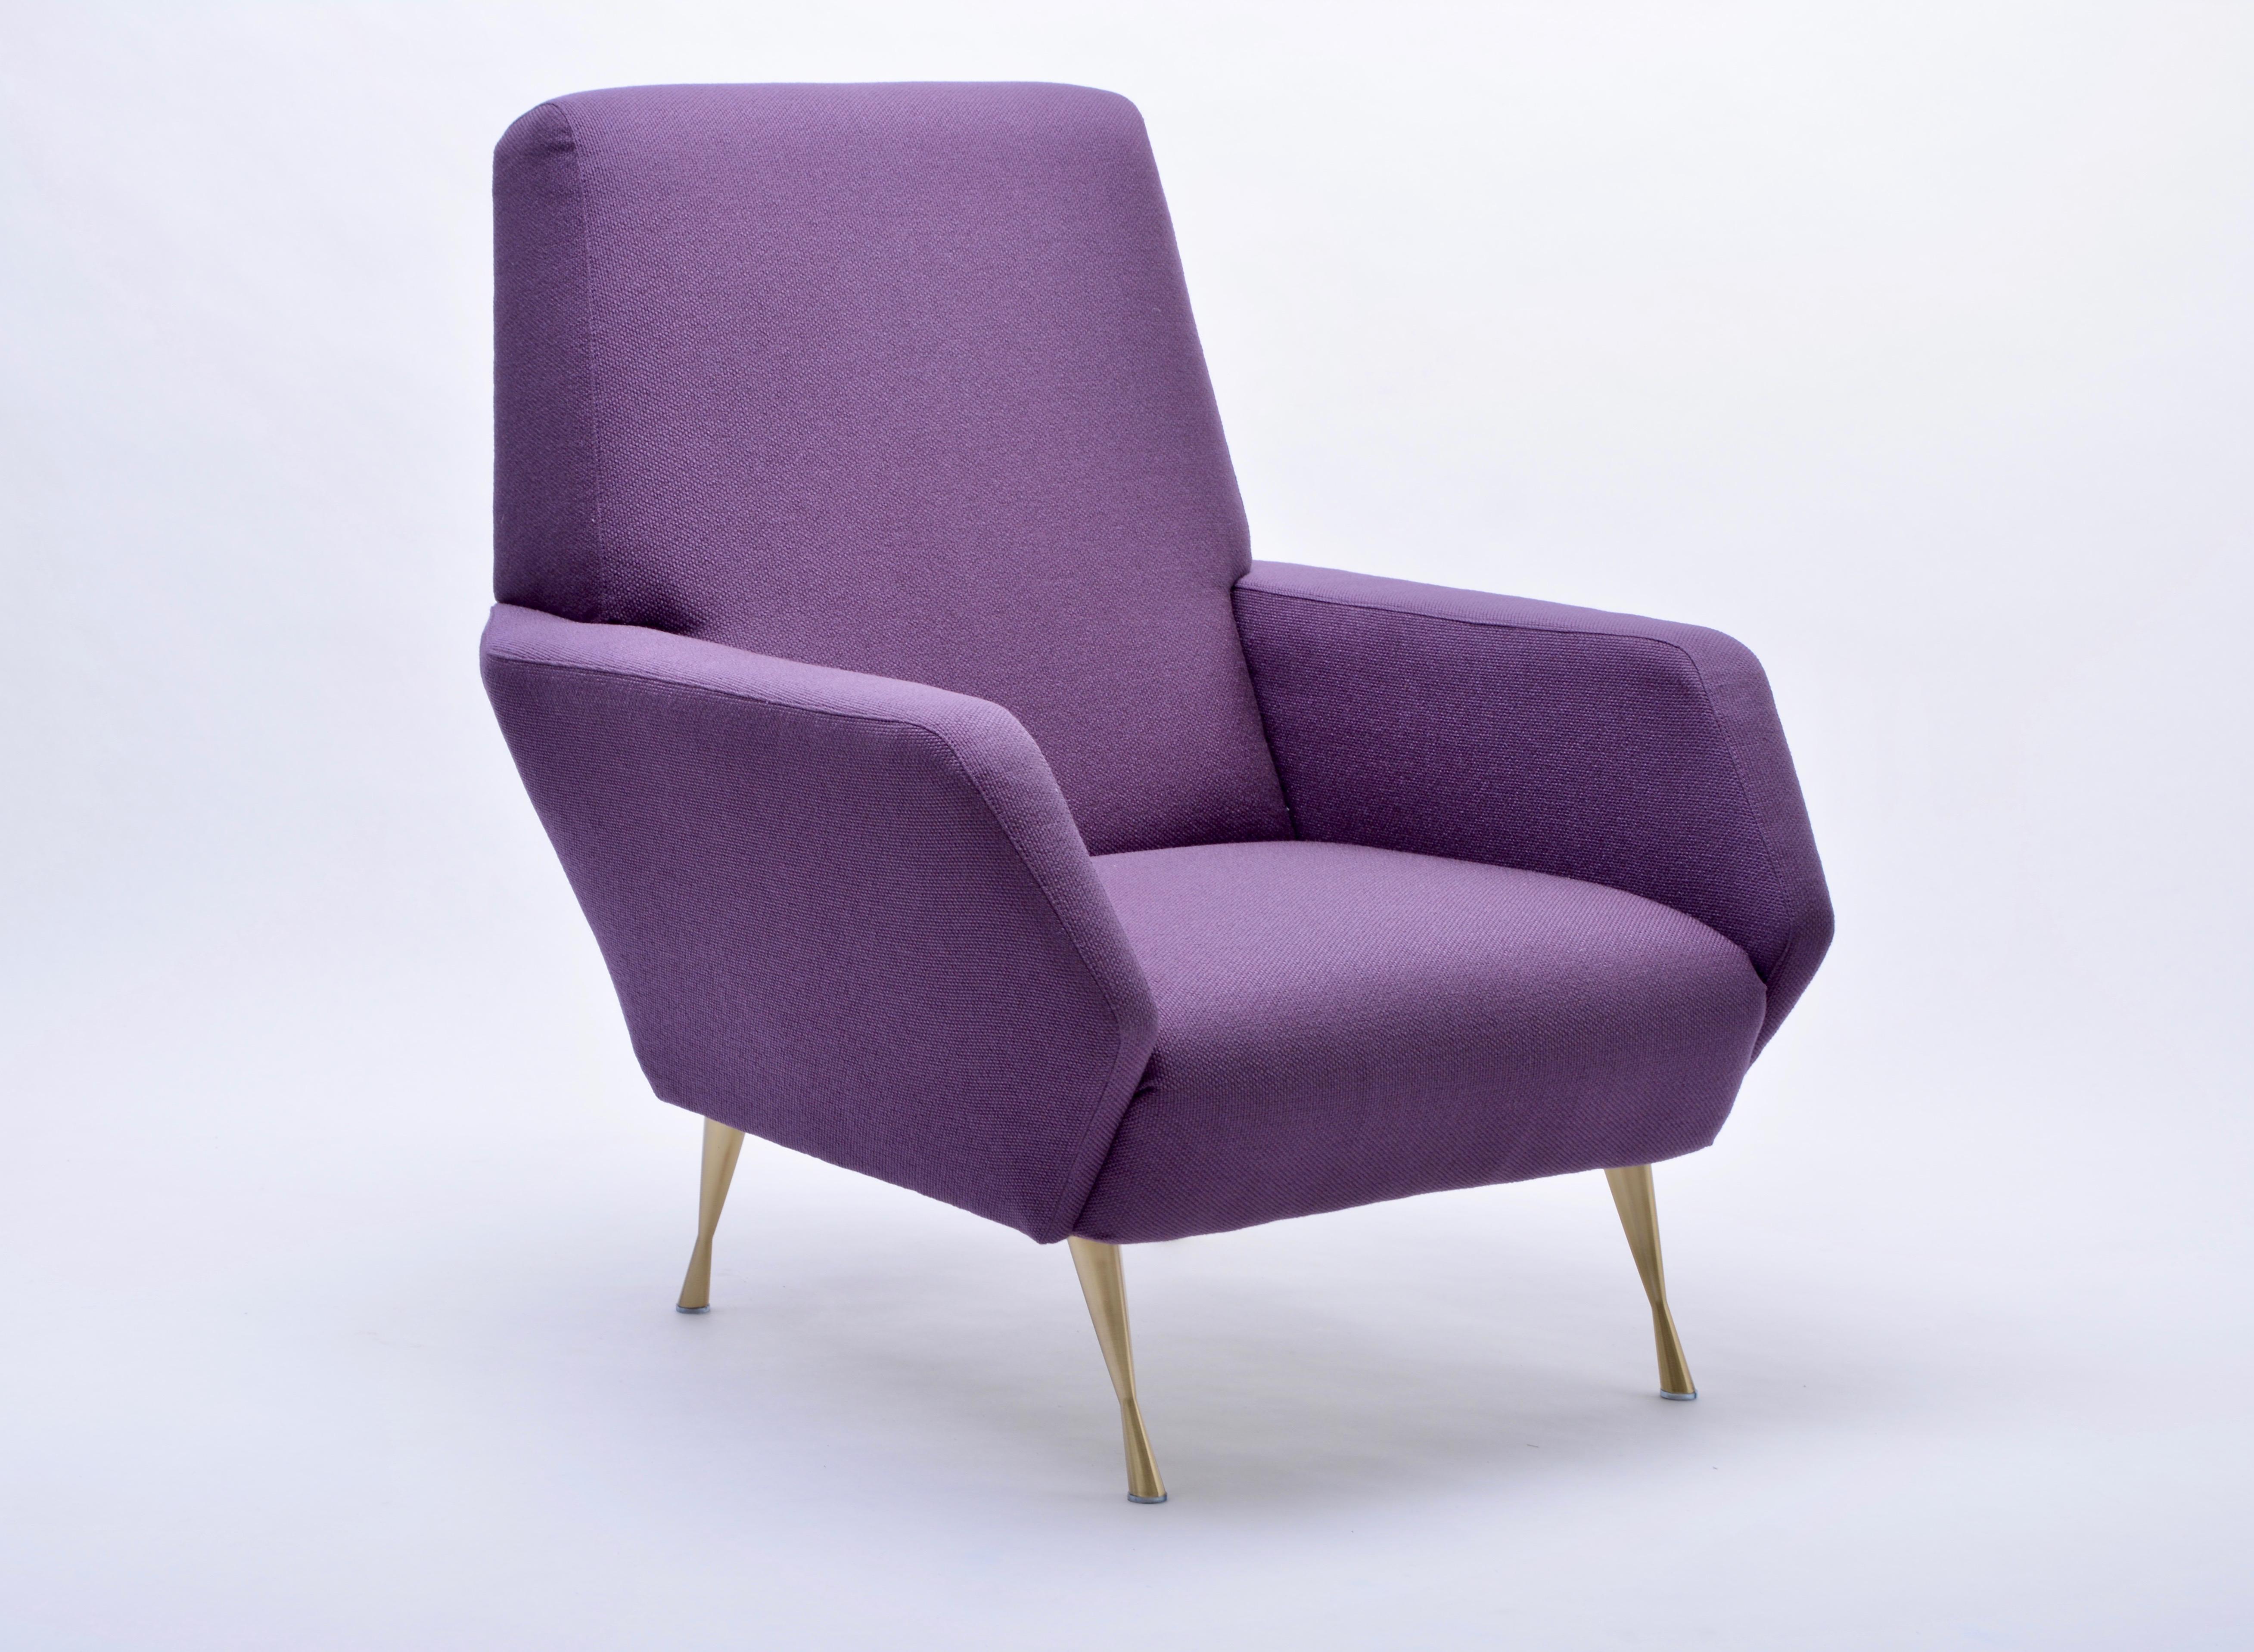 Purple Mid-Century Modern reupholstered ItalianlLounge Chair

This lounge chair was produced in Italy in the 1950s. It has been completely reupholstered in purple fabric and has new brass feet. Two chairs available.